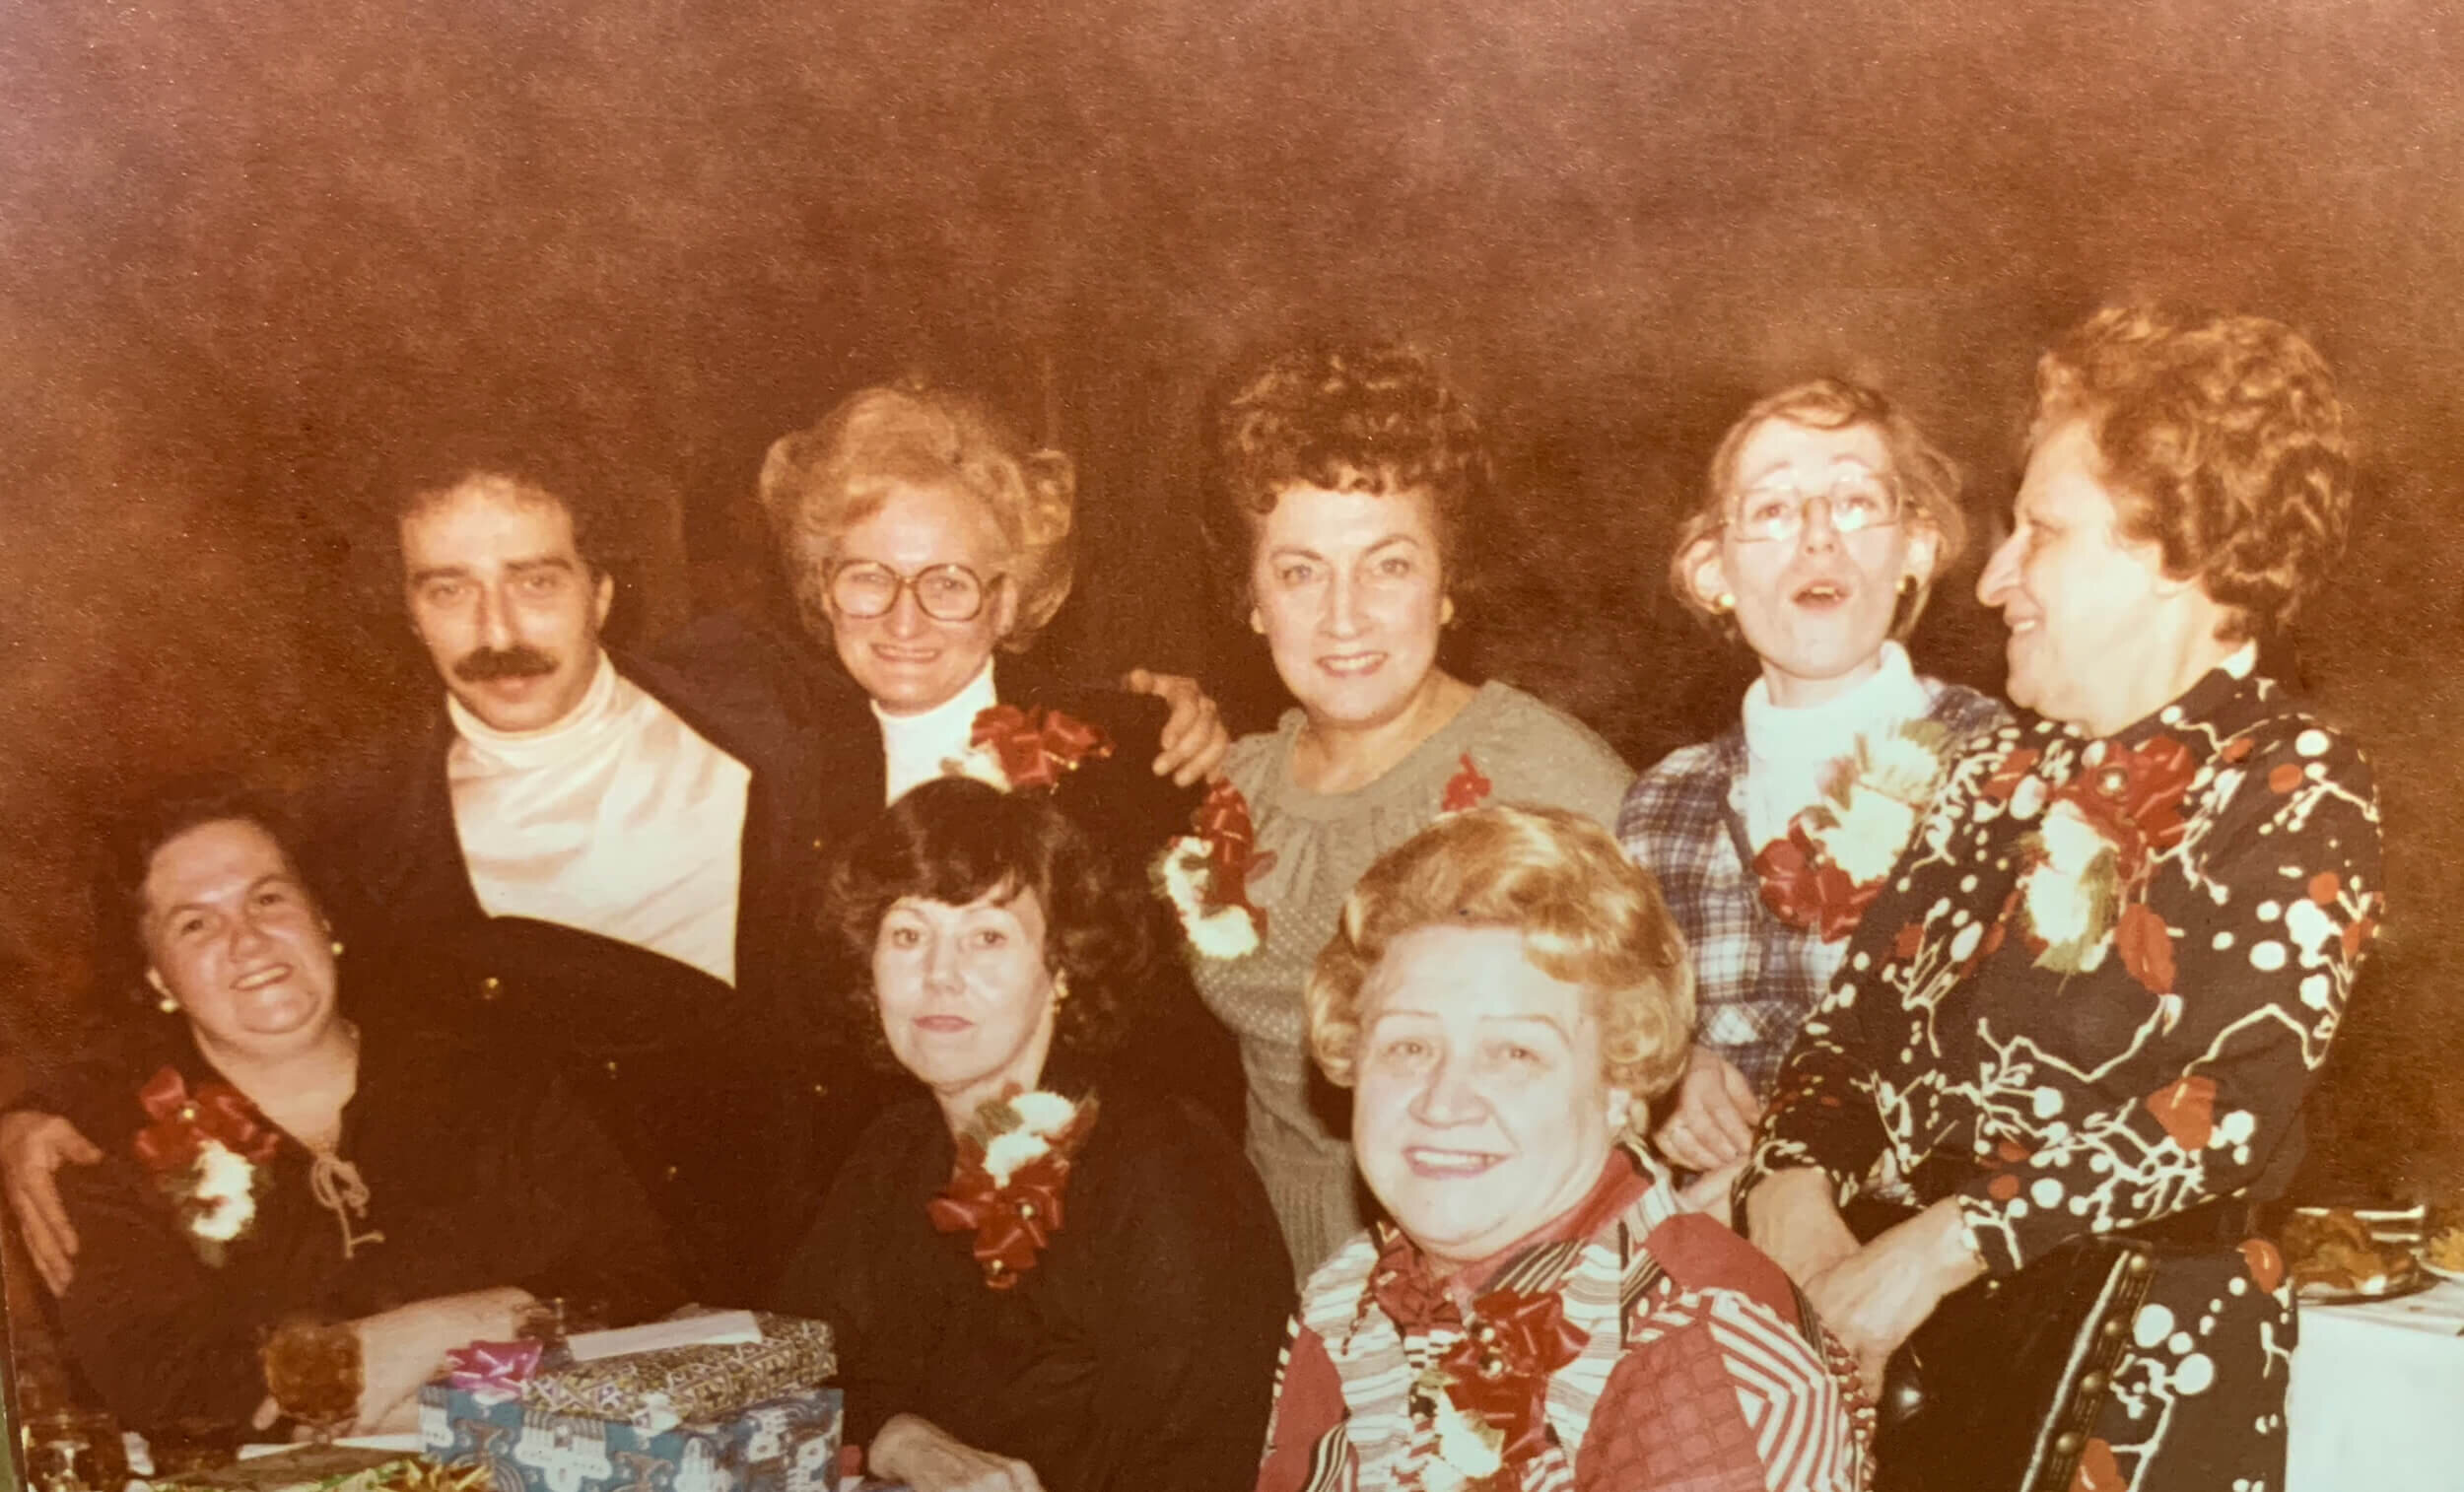 Flortek Corporation team at the 1978 holiday party.